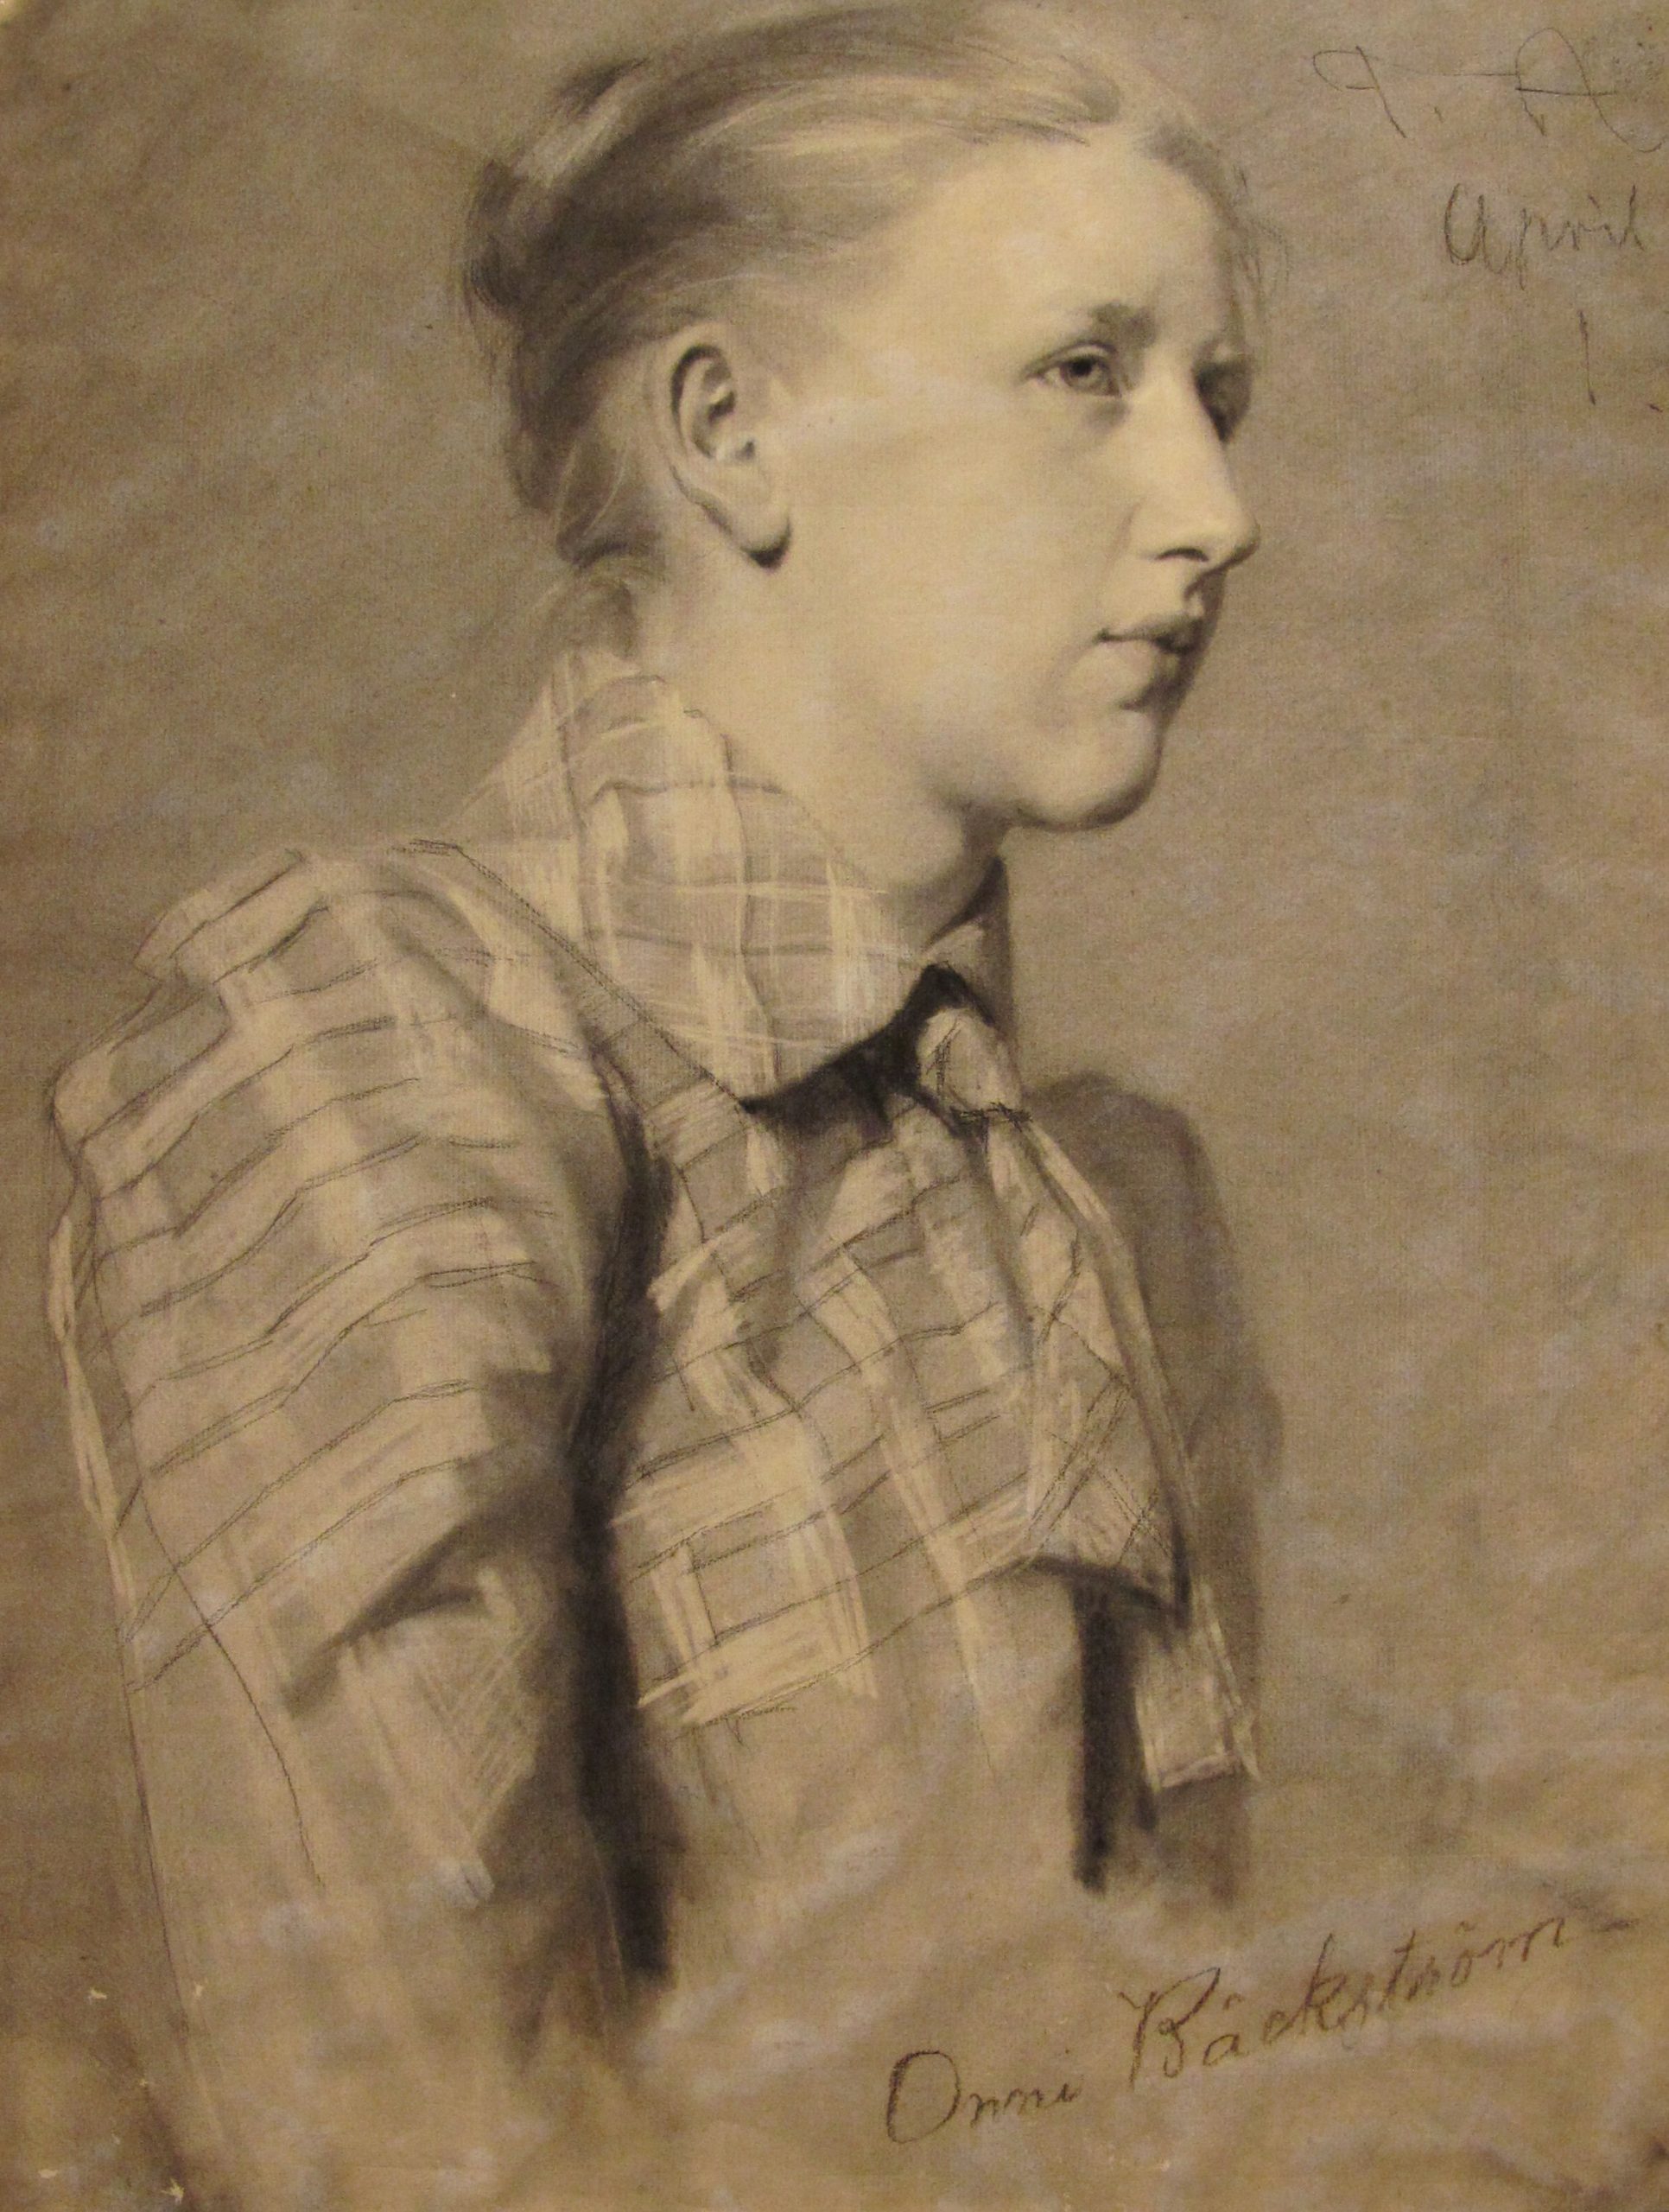 Drawing of a woman with a check shirt and hair in a bun, halv figure, profile.